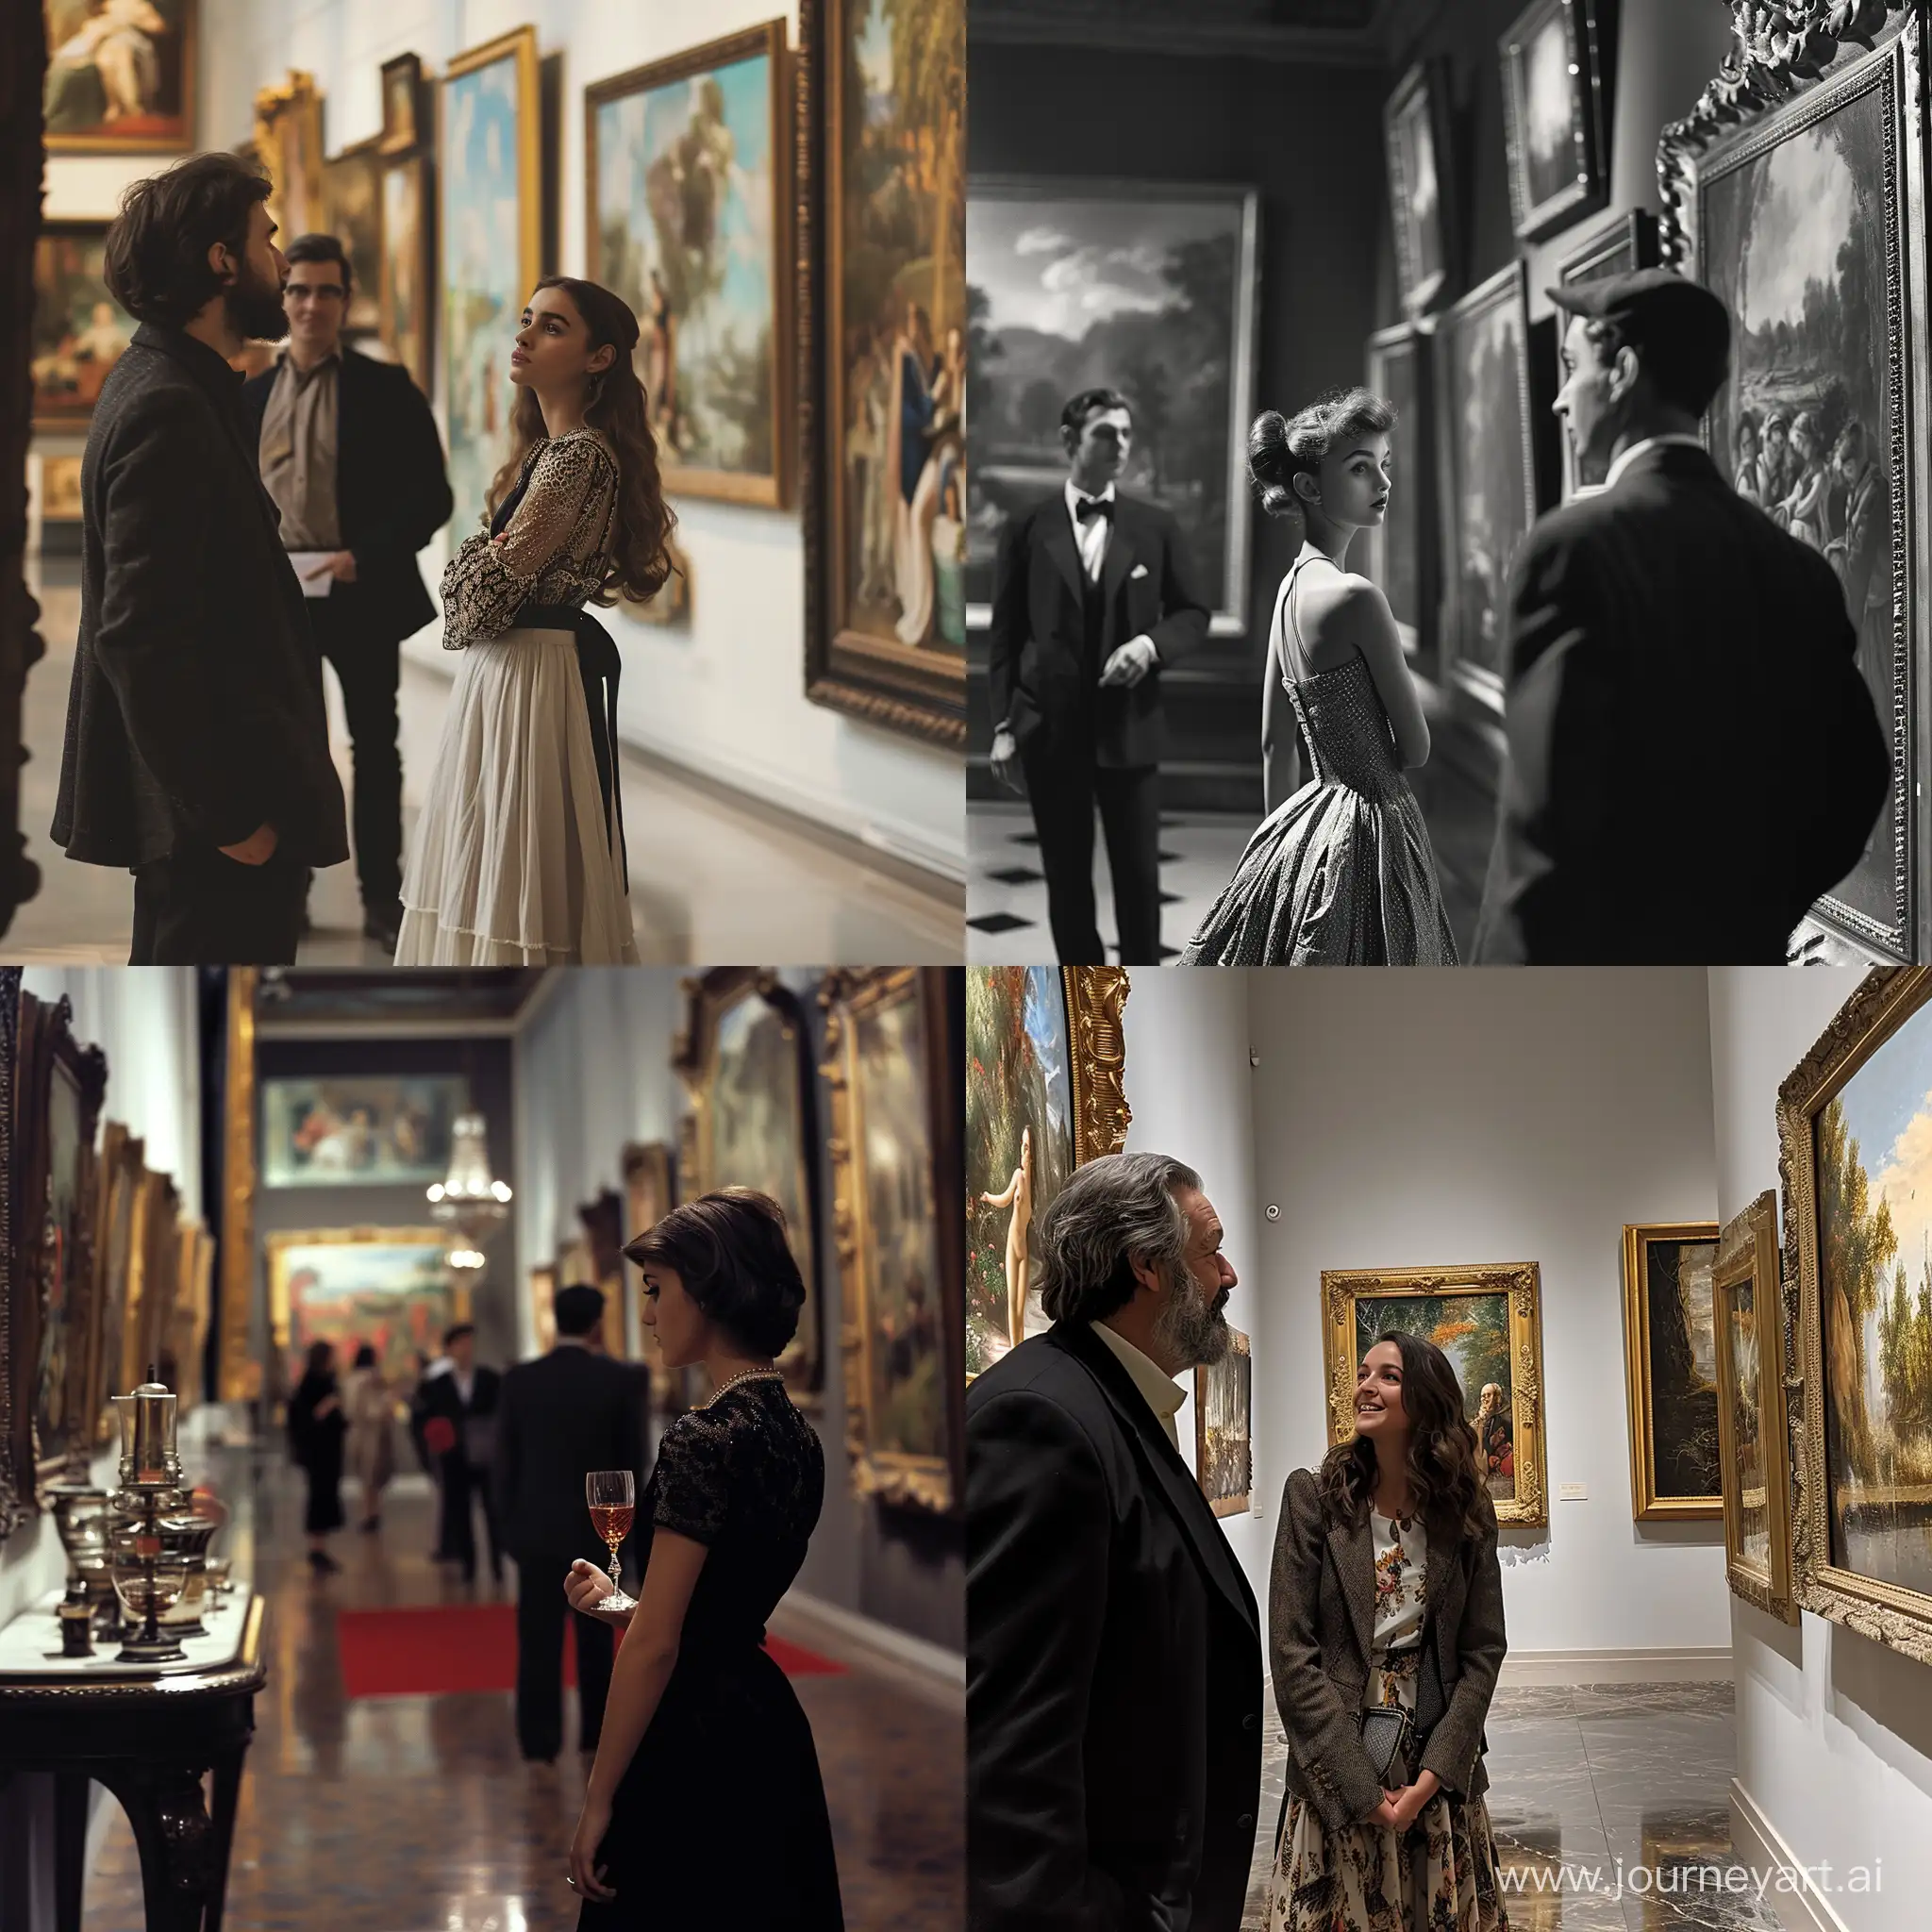 Sophisticated-Woman-and-Affluent-Gentleman-in-Art-Gallery